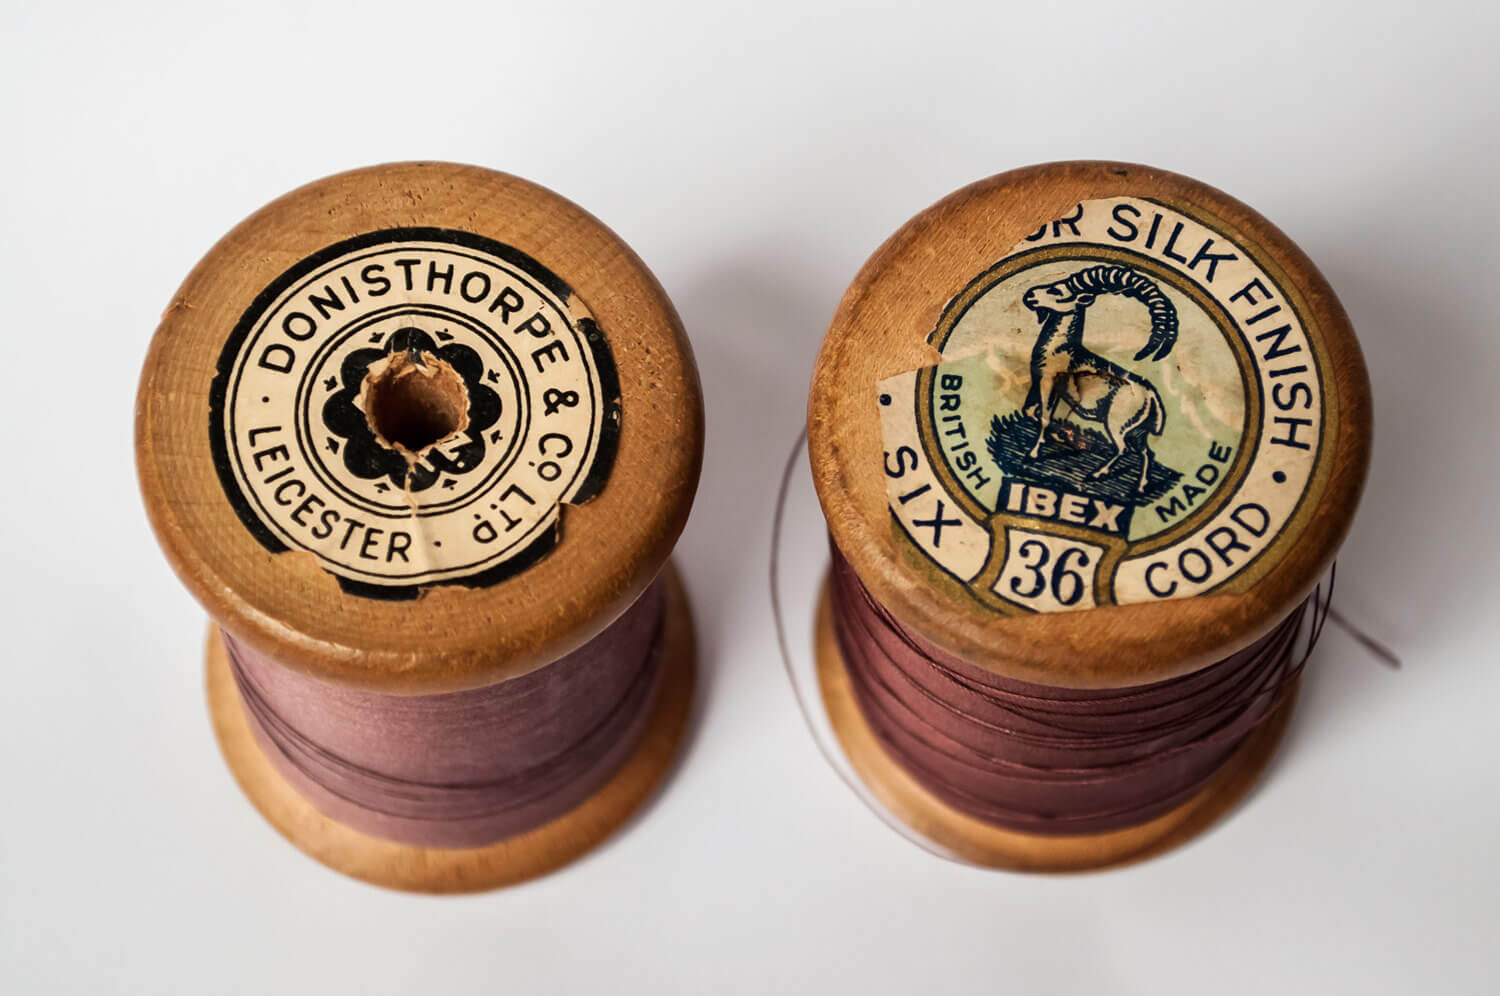 Donisthorpe branded cotton reels - from the collection of Leicester Museums